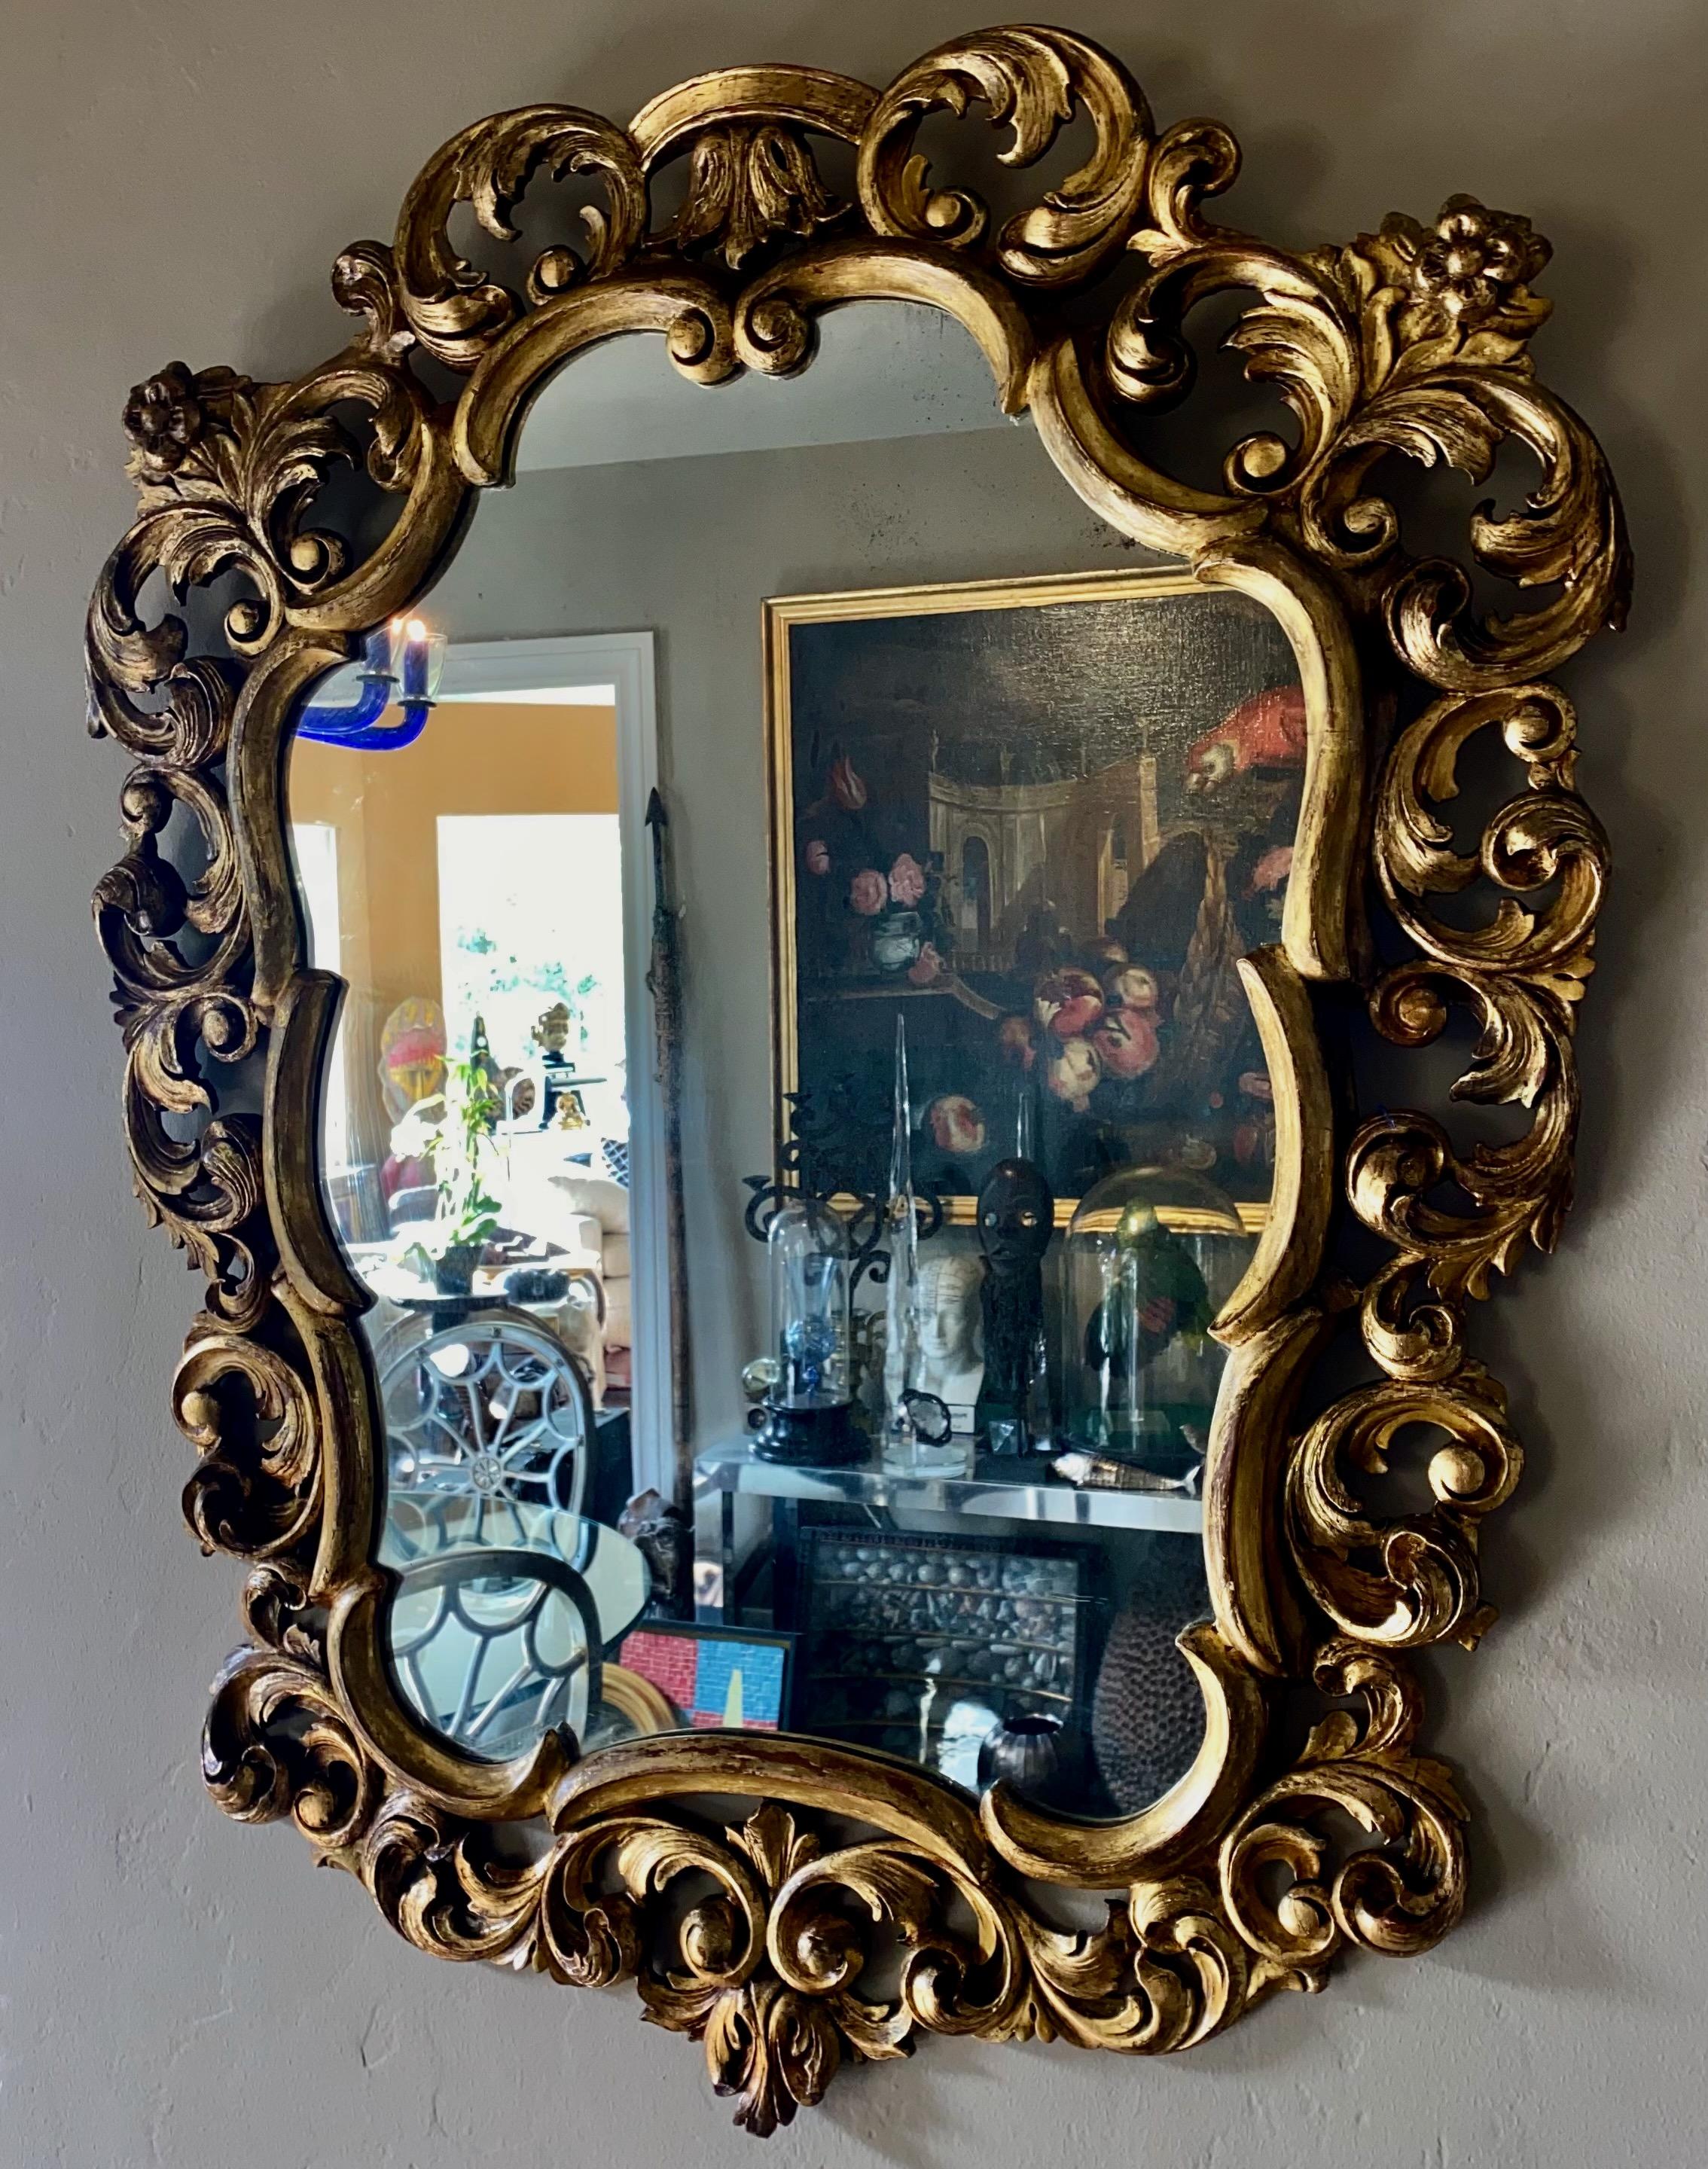 Beautifully carved wood and gilded mirror, having a C scroll and floral design, with original Fratelli Paoletti label on back.
Original refreshed finish with slightly aged original mirror.
Italy, circa 1950.
In excellent condition.
    